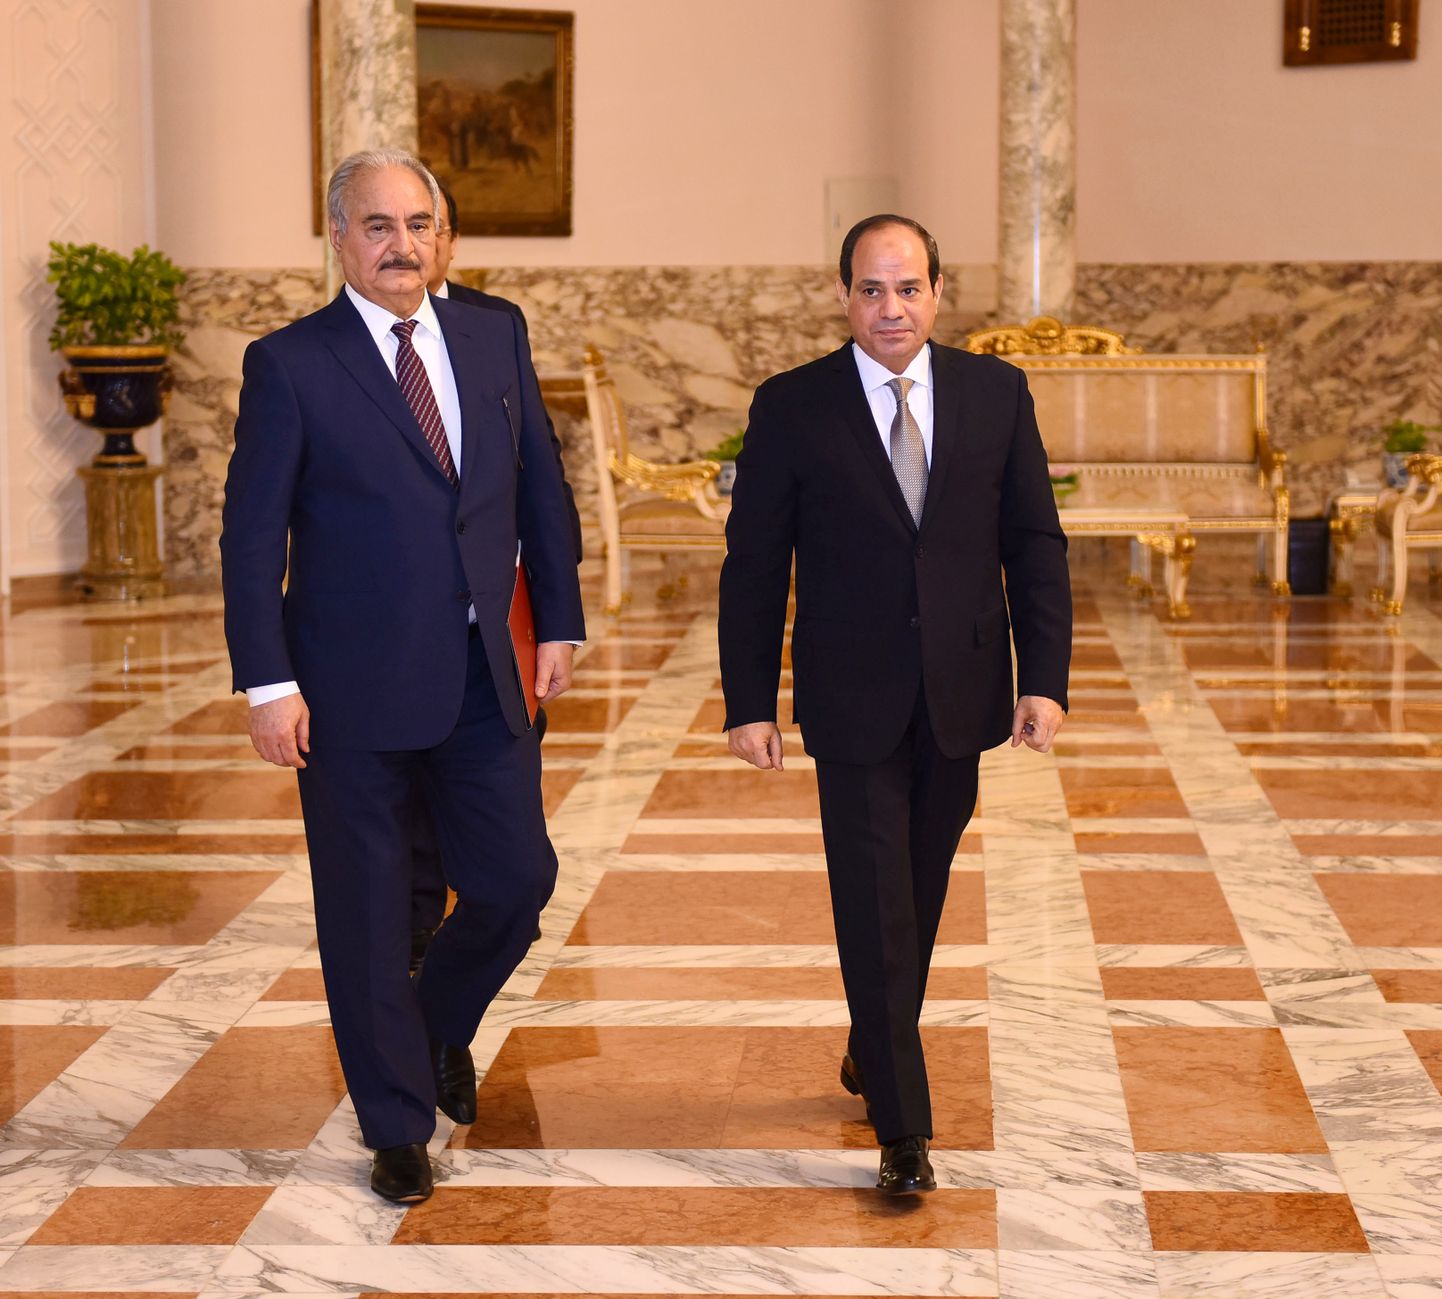 Libyan military commander Khalifa Haftar walks with Egyptian President Abdel Fattah al-Sisi at the Presidential Palace in Cairo, Egypt April 14, 2019 in this handout picture courtesy of the Egyptian Presidency. The Egyptian Presidency/Handout via REUTERS ATTENTION EDITORS - THIS IMAGE WAS PROVIDED BY A THIRD PARTY.